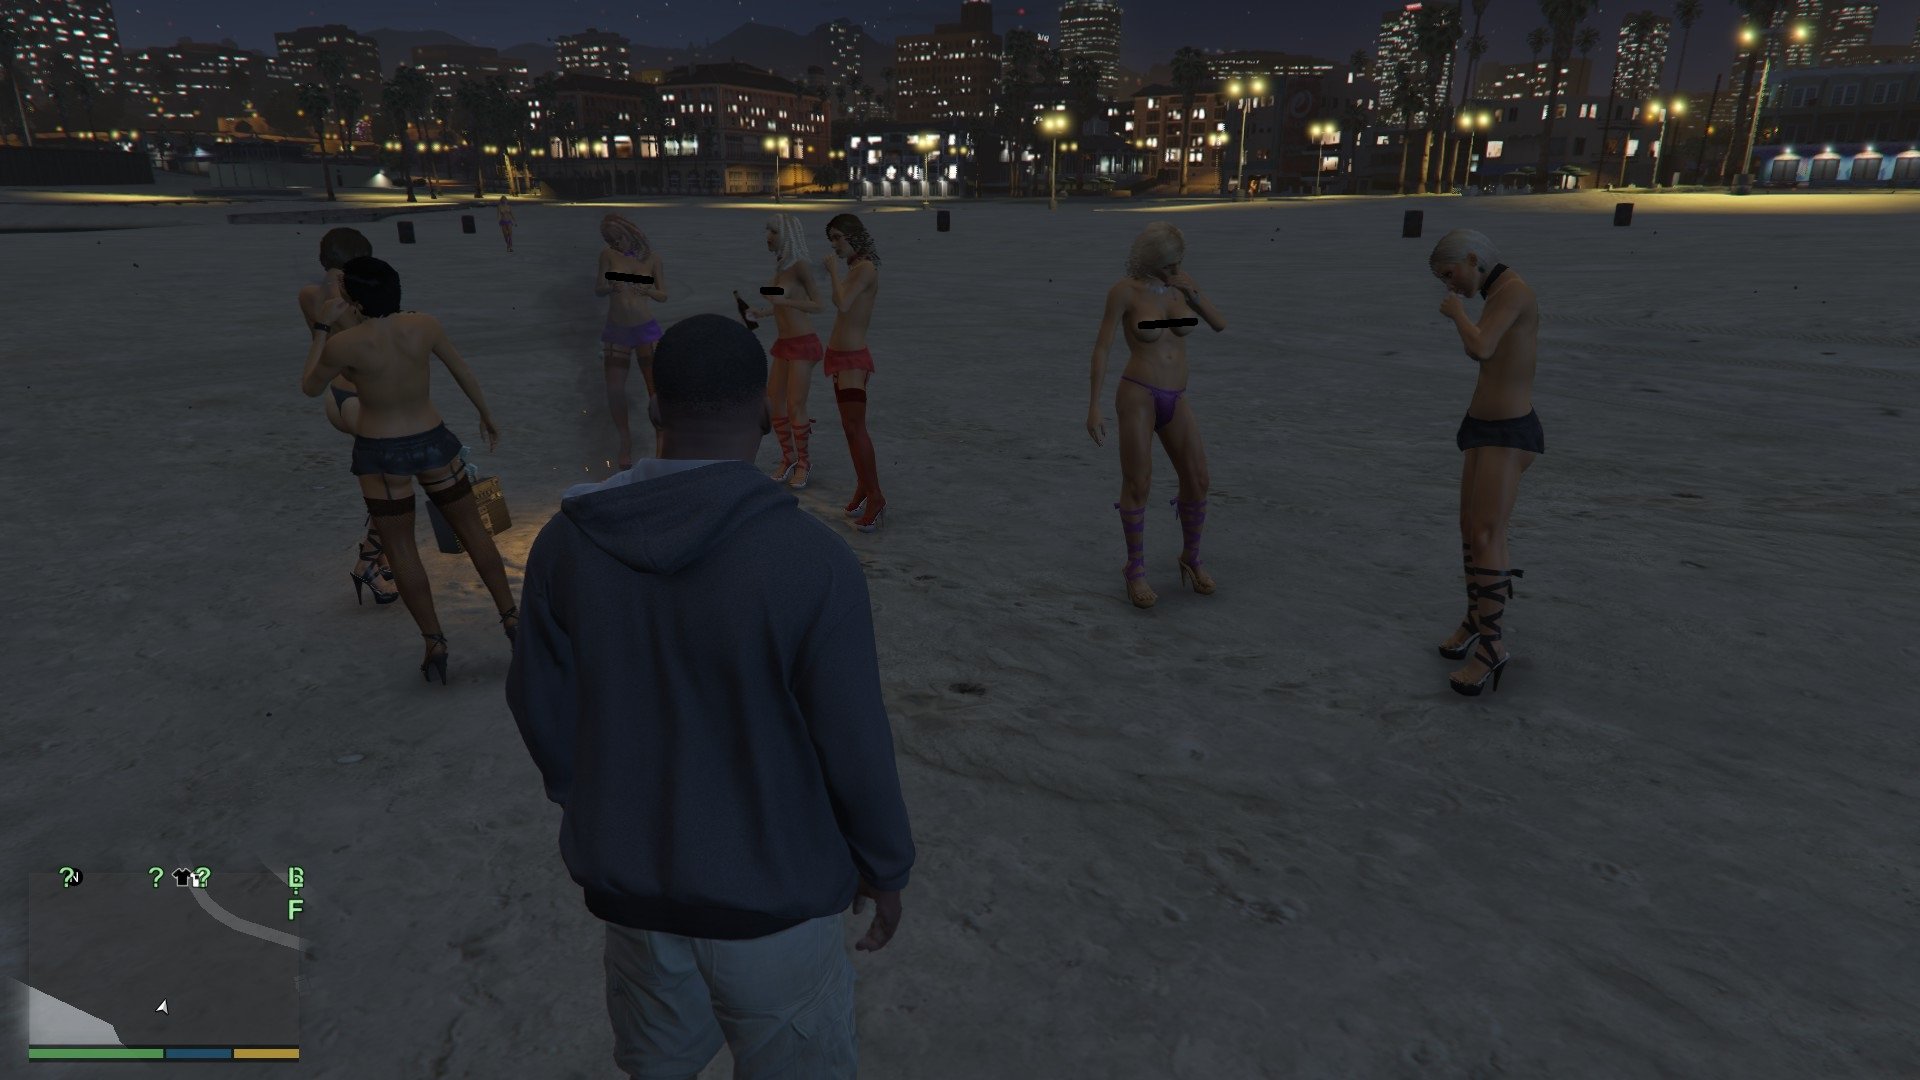 Best of Grand theft auto v nudity